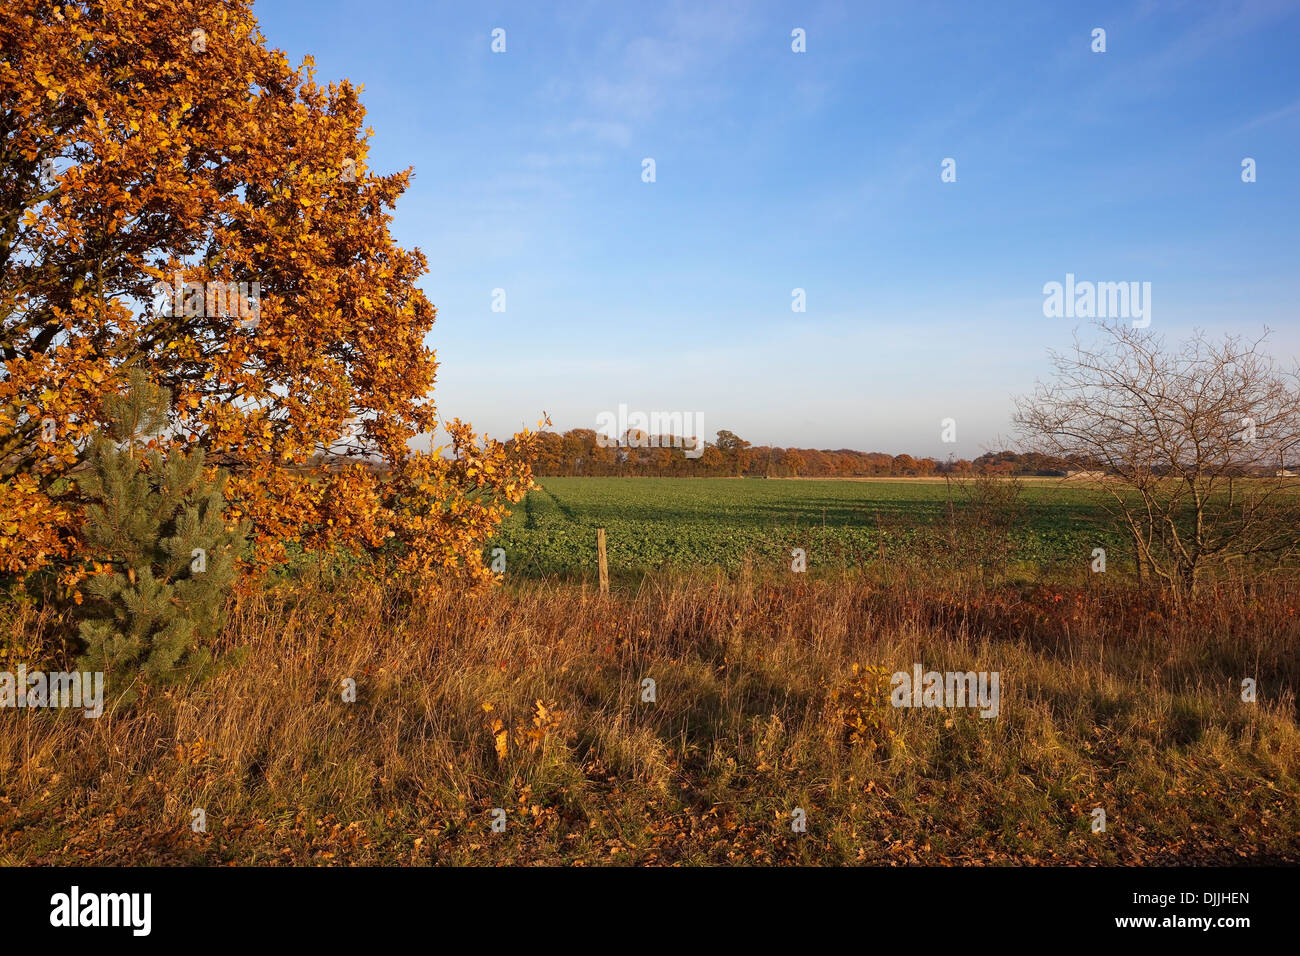 Colorful Oak tree leaves and dry grasses framing an Autumn landscape of arable fields and distant trees under a blue sky Stock Photo